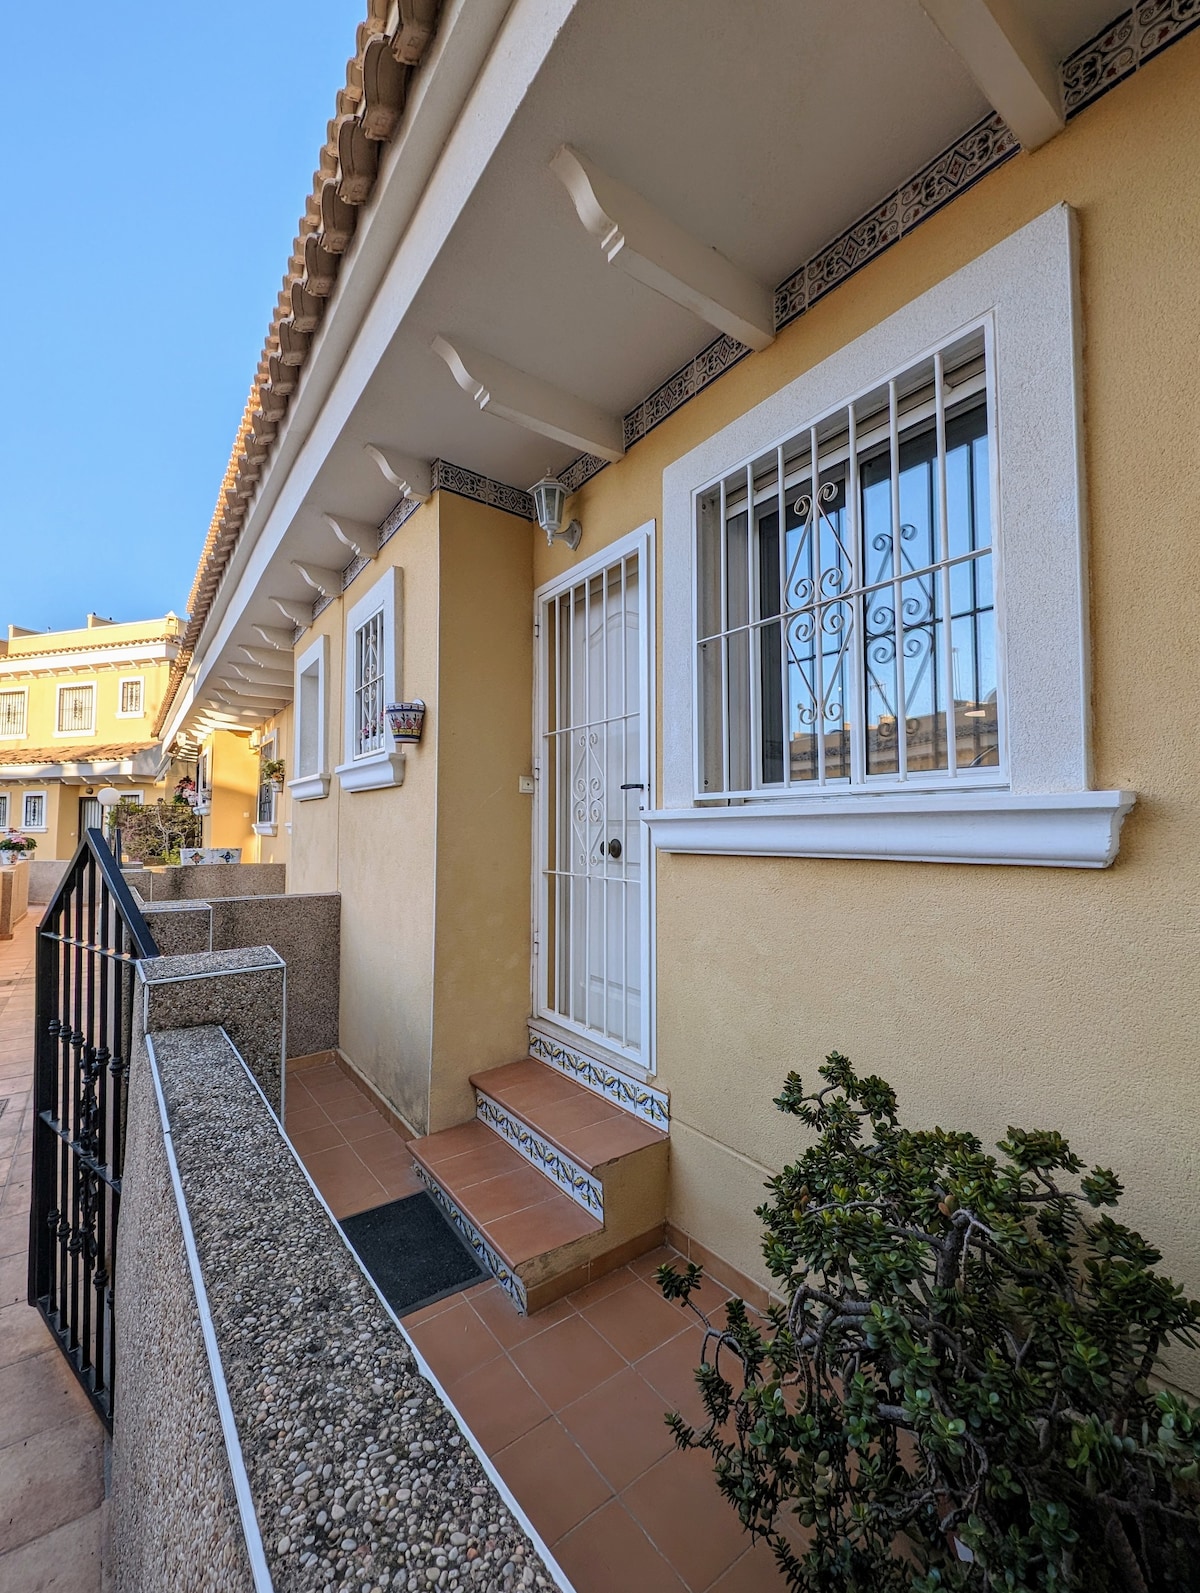 2 Bedroom Algorfa Townhouse with Communal Pool